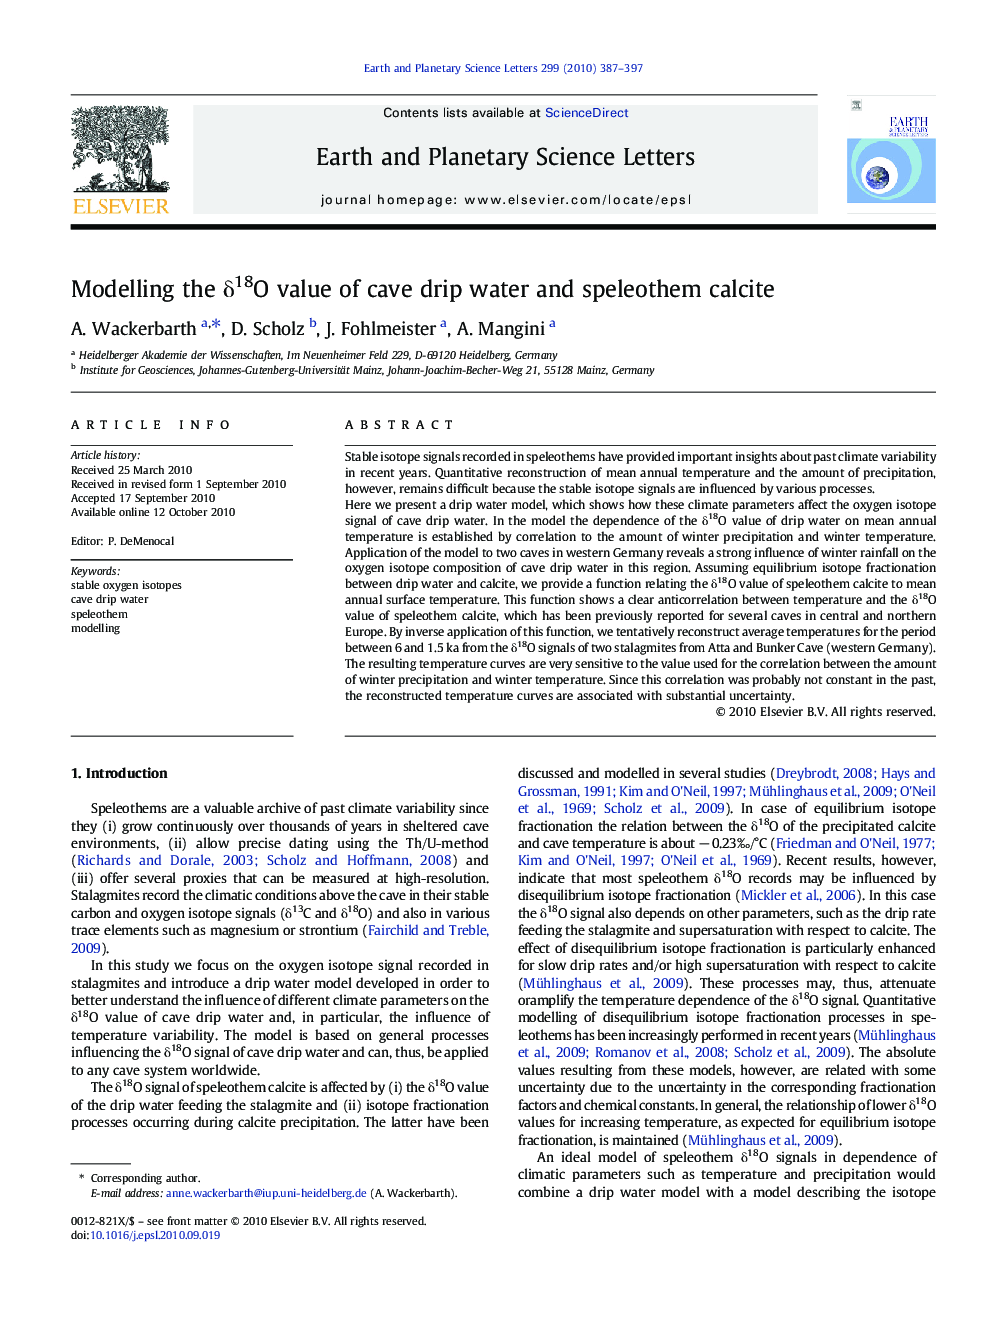 Modelling the δ18O value of cave drip water and speleothem calcite